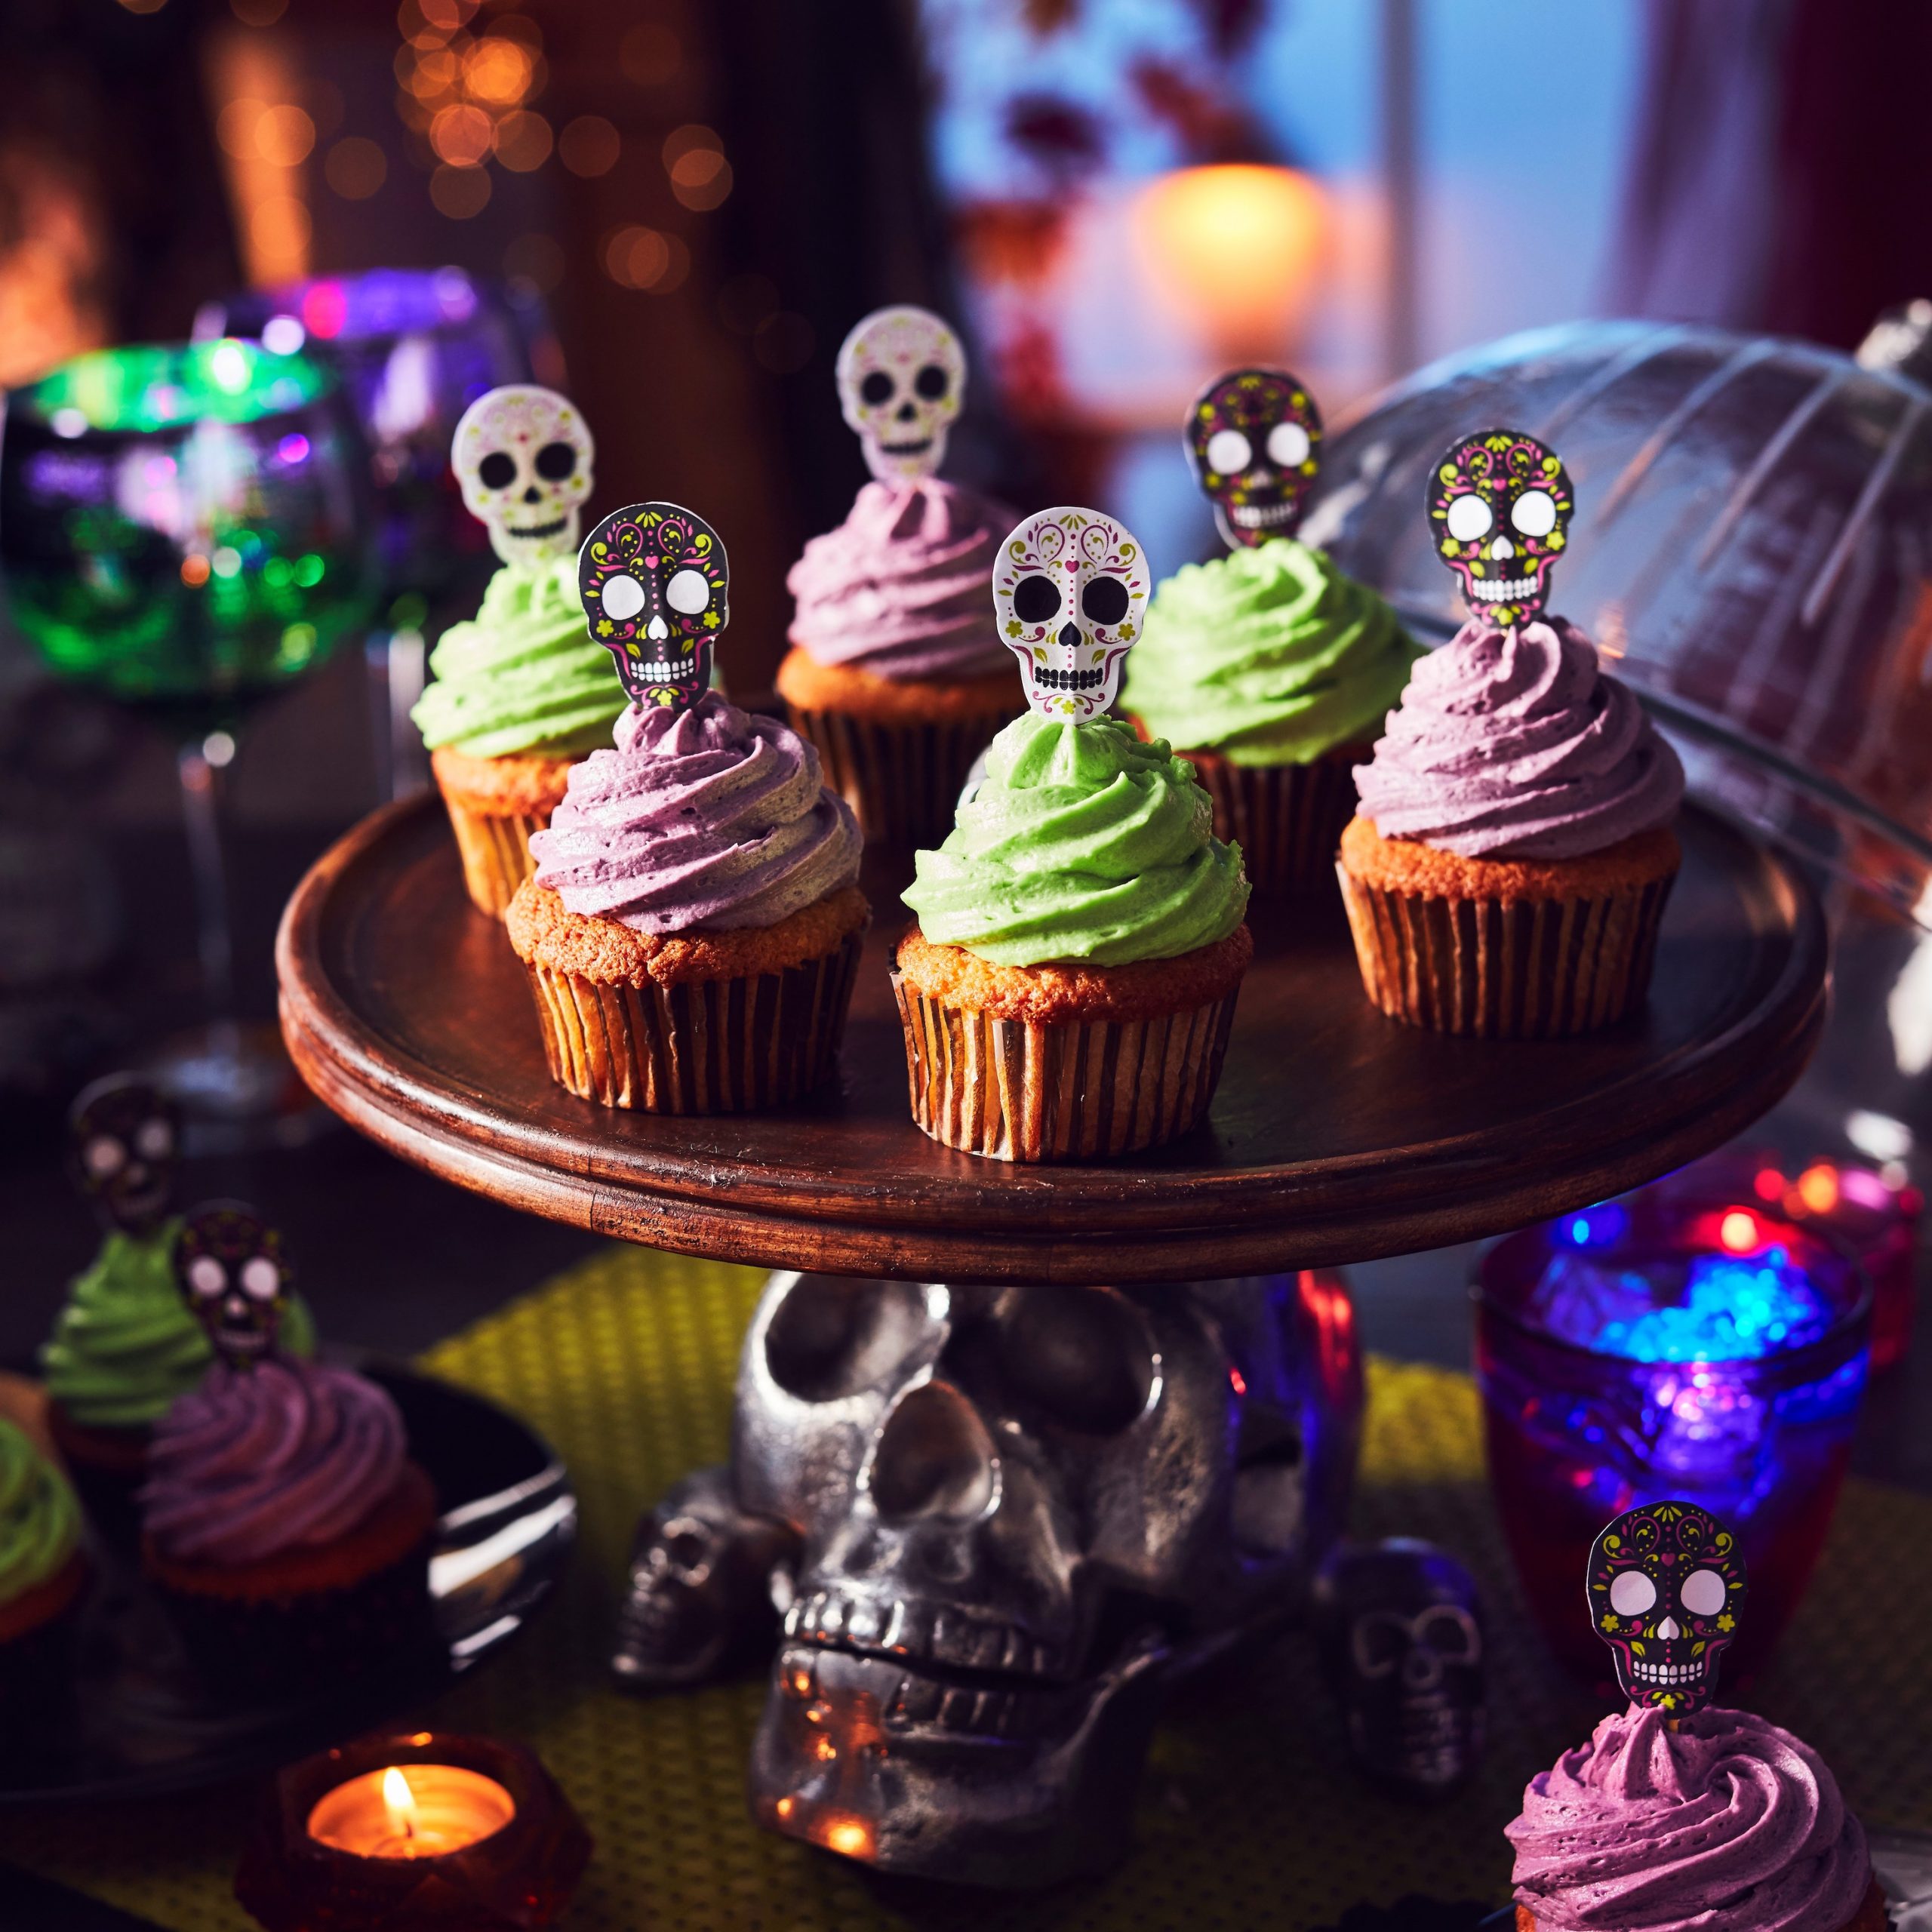 Costcutter launches ‘Scaring’s for Sharing’ Halloween campaign